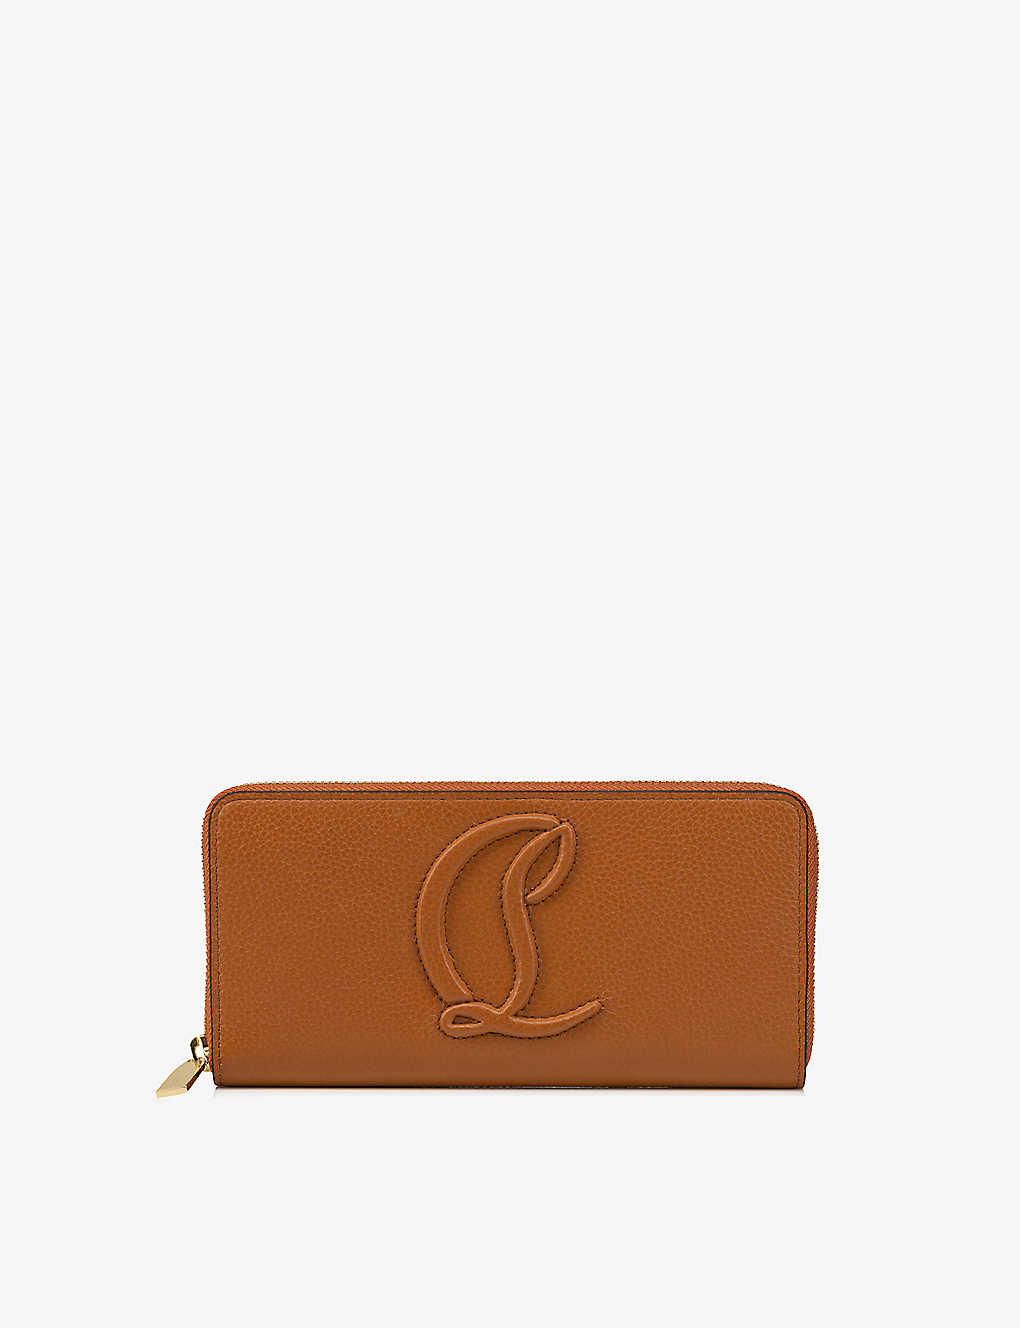 Shop Christian Louboutin Womens Cuoio By My Side Leather Wallet